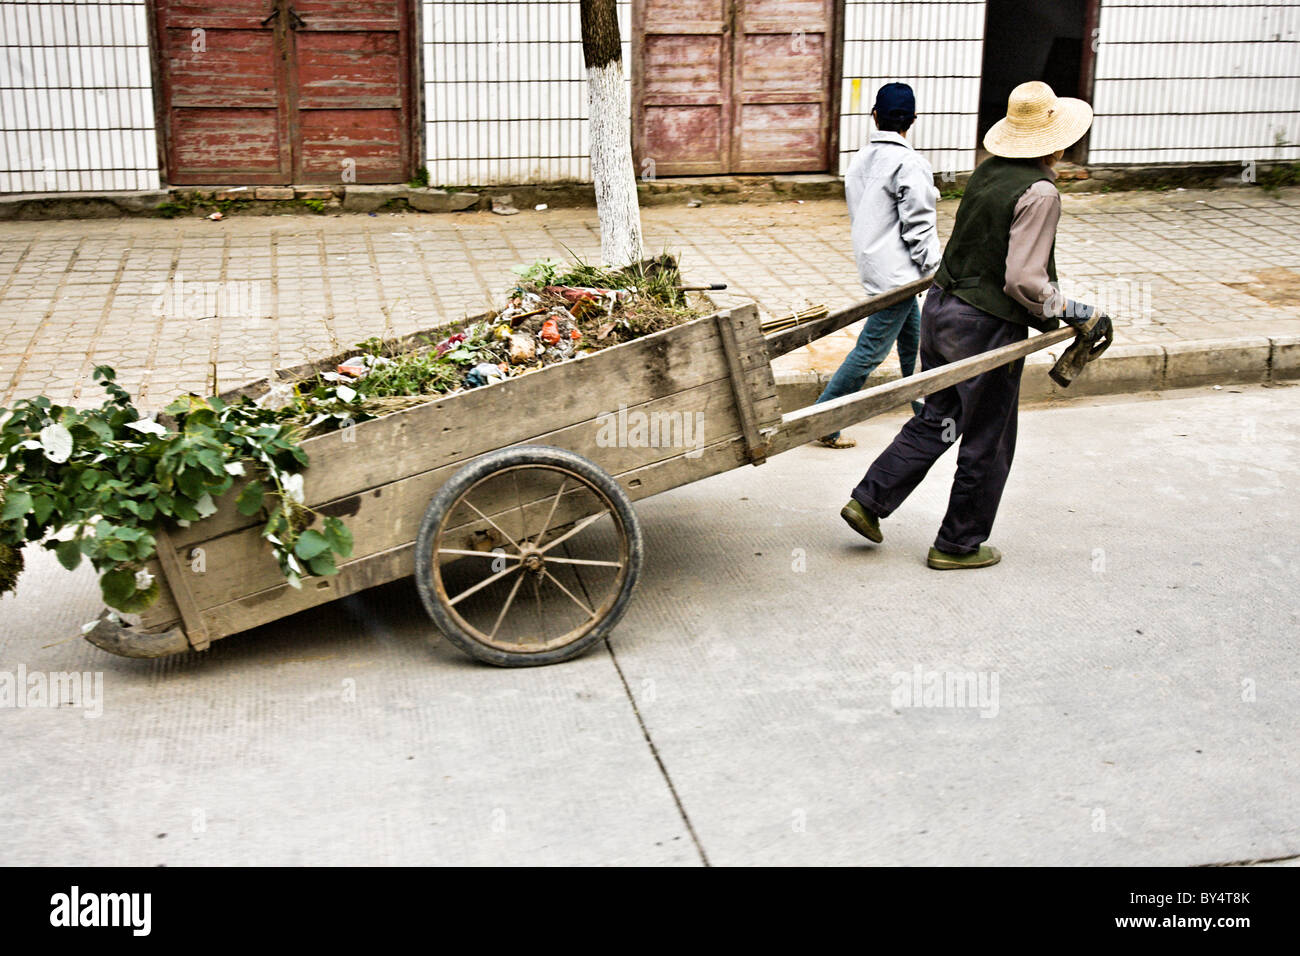 CHINA, YICHANG, SANDOUPING: Street scene of elderly farm woman and her daughter pulling a wooden cart Stock Photo